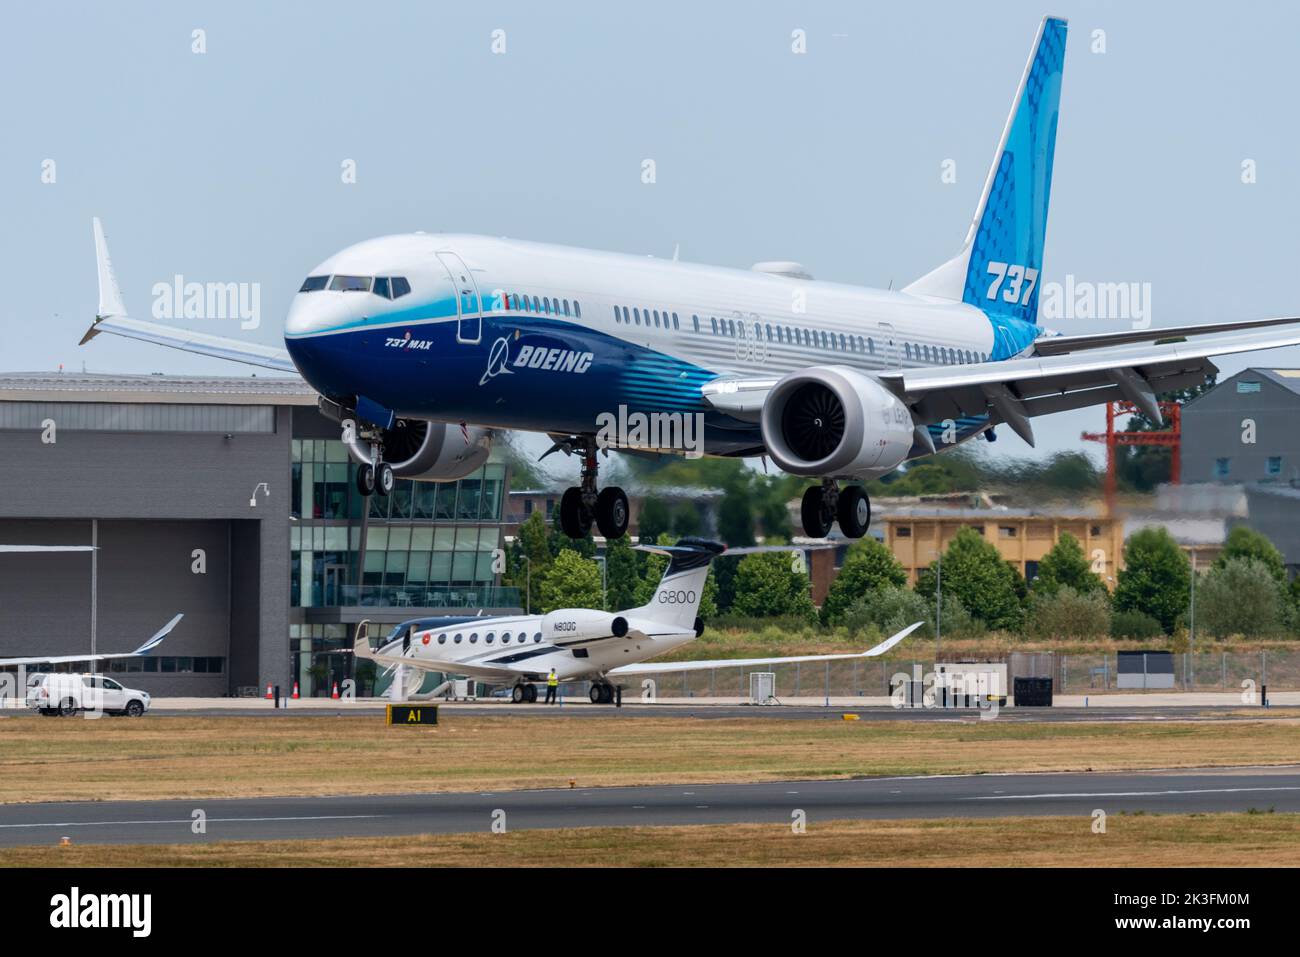 Boeing 737 MAX 10 airliner jet plane, new version of the MAX series, landing at Farnborough International Airshow 2022 after demonstration flight Stock Photo